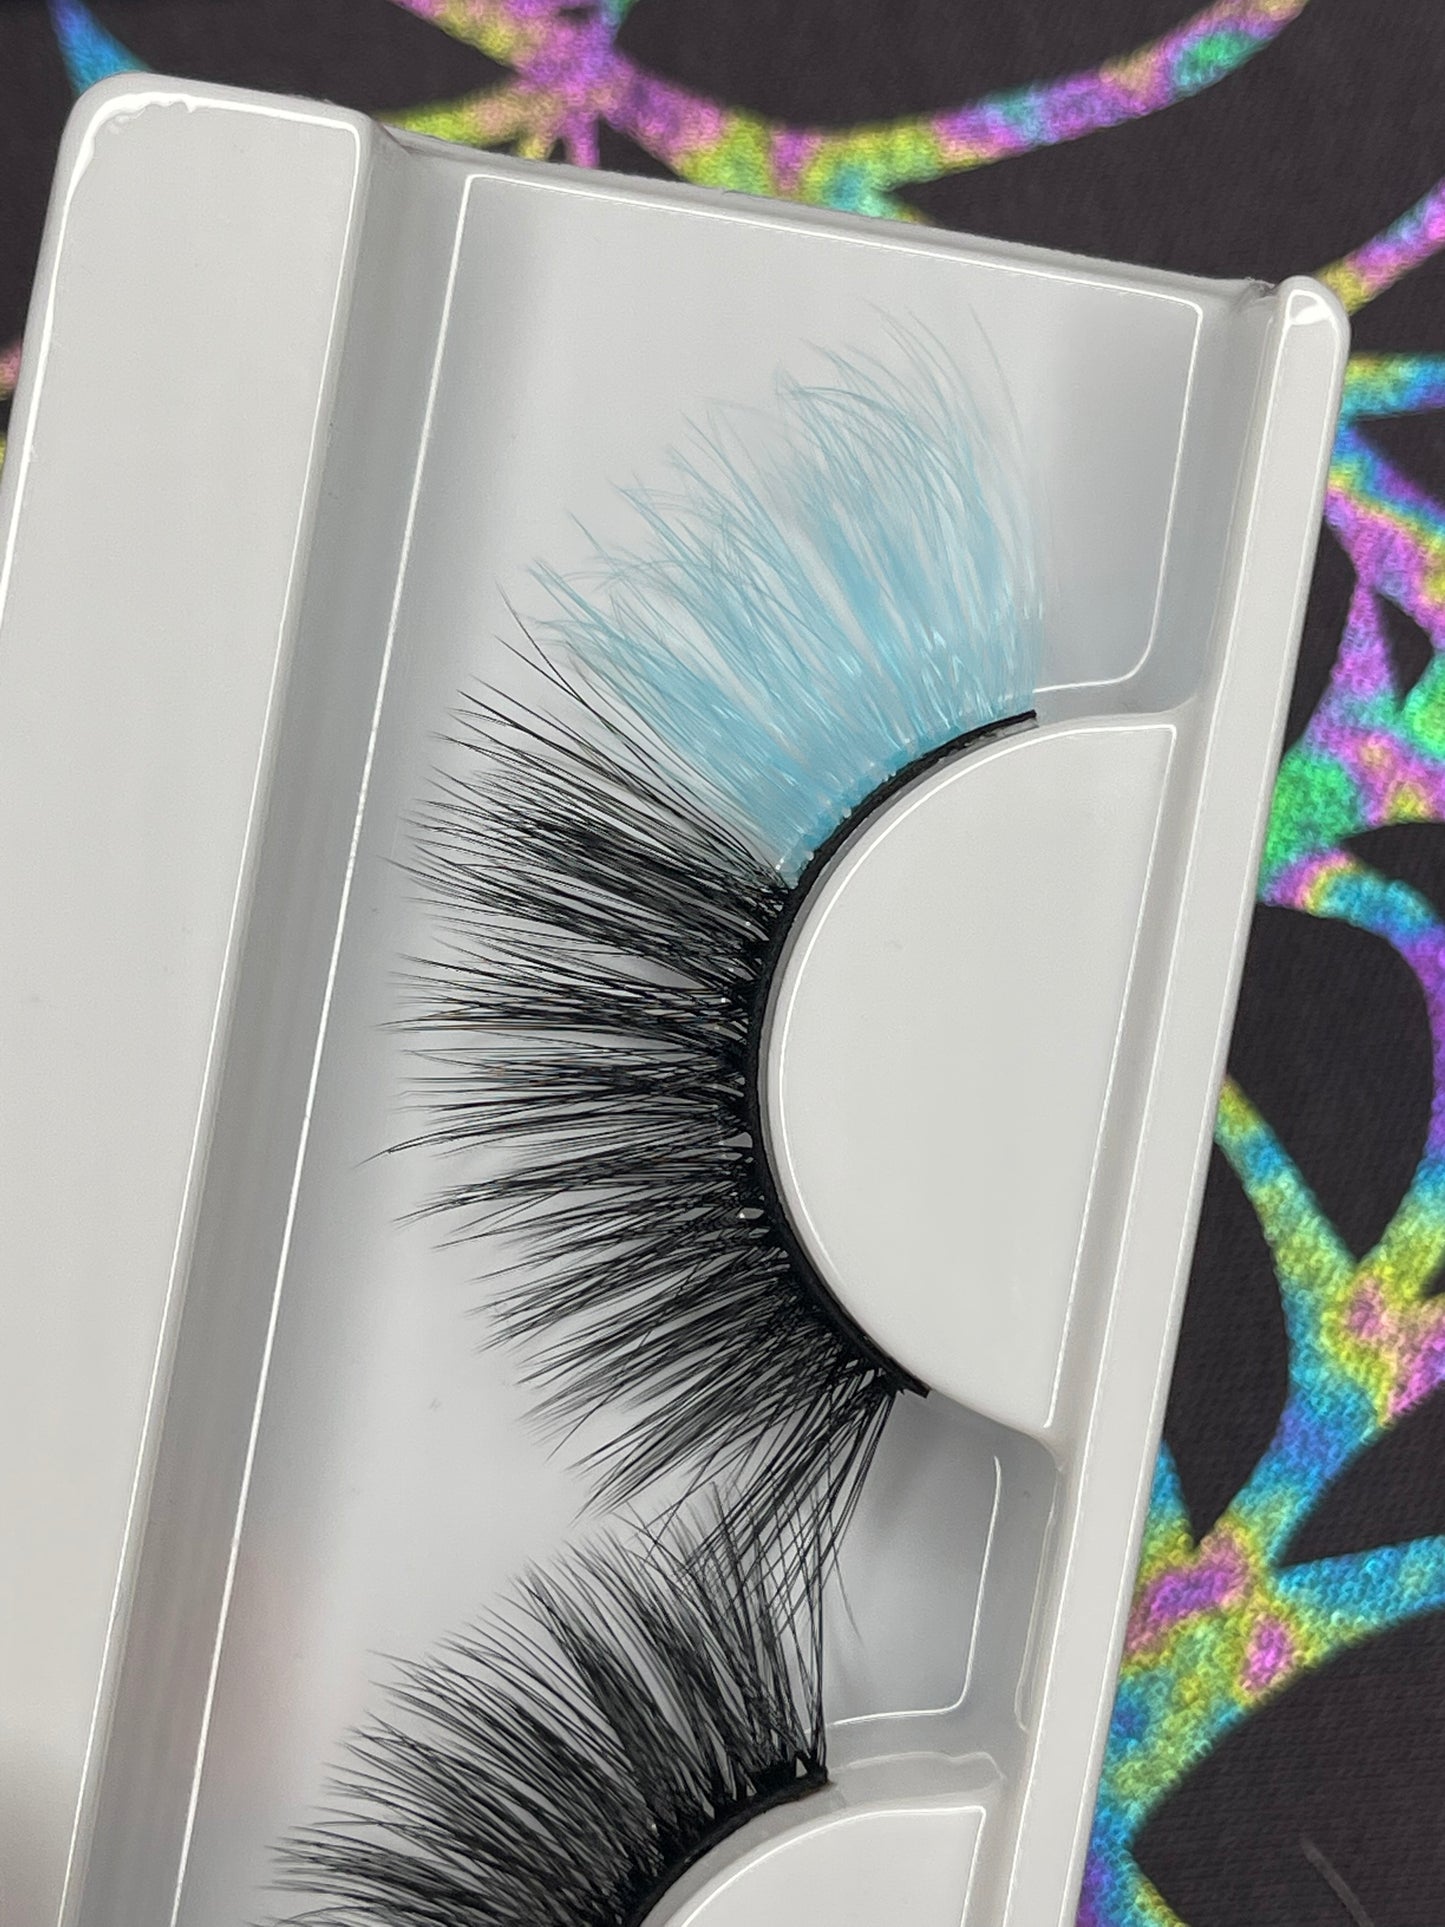 "Out cold" Faux Mink Lashes